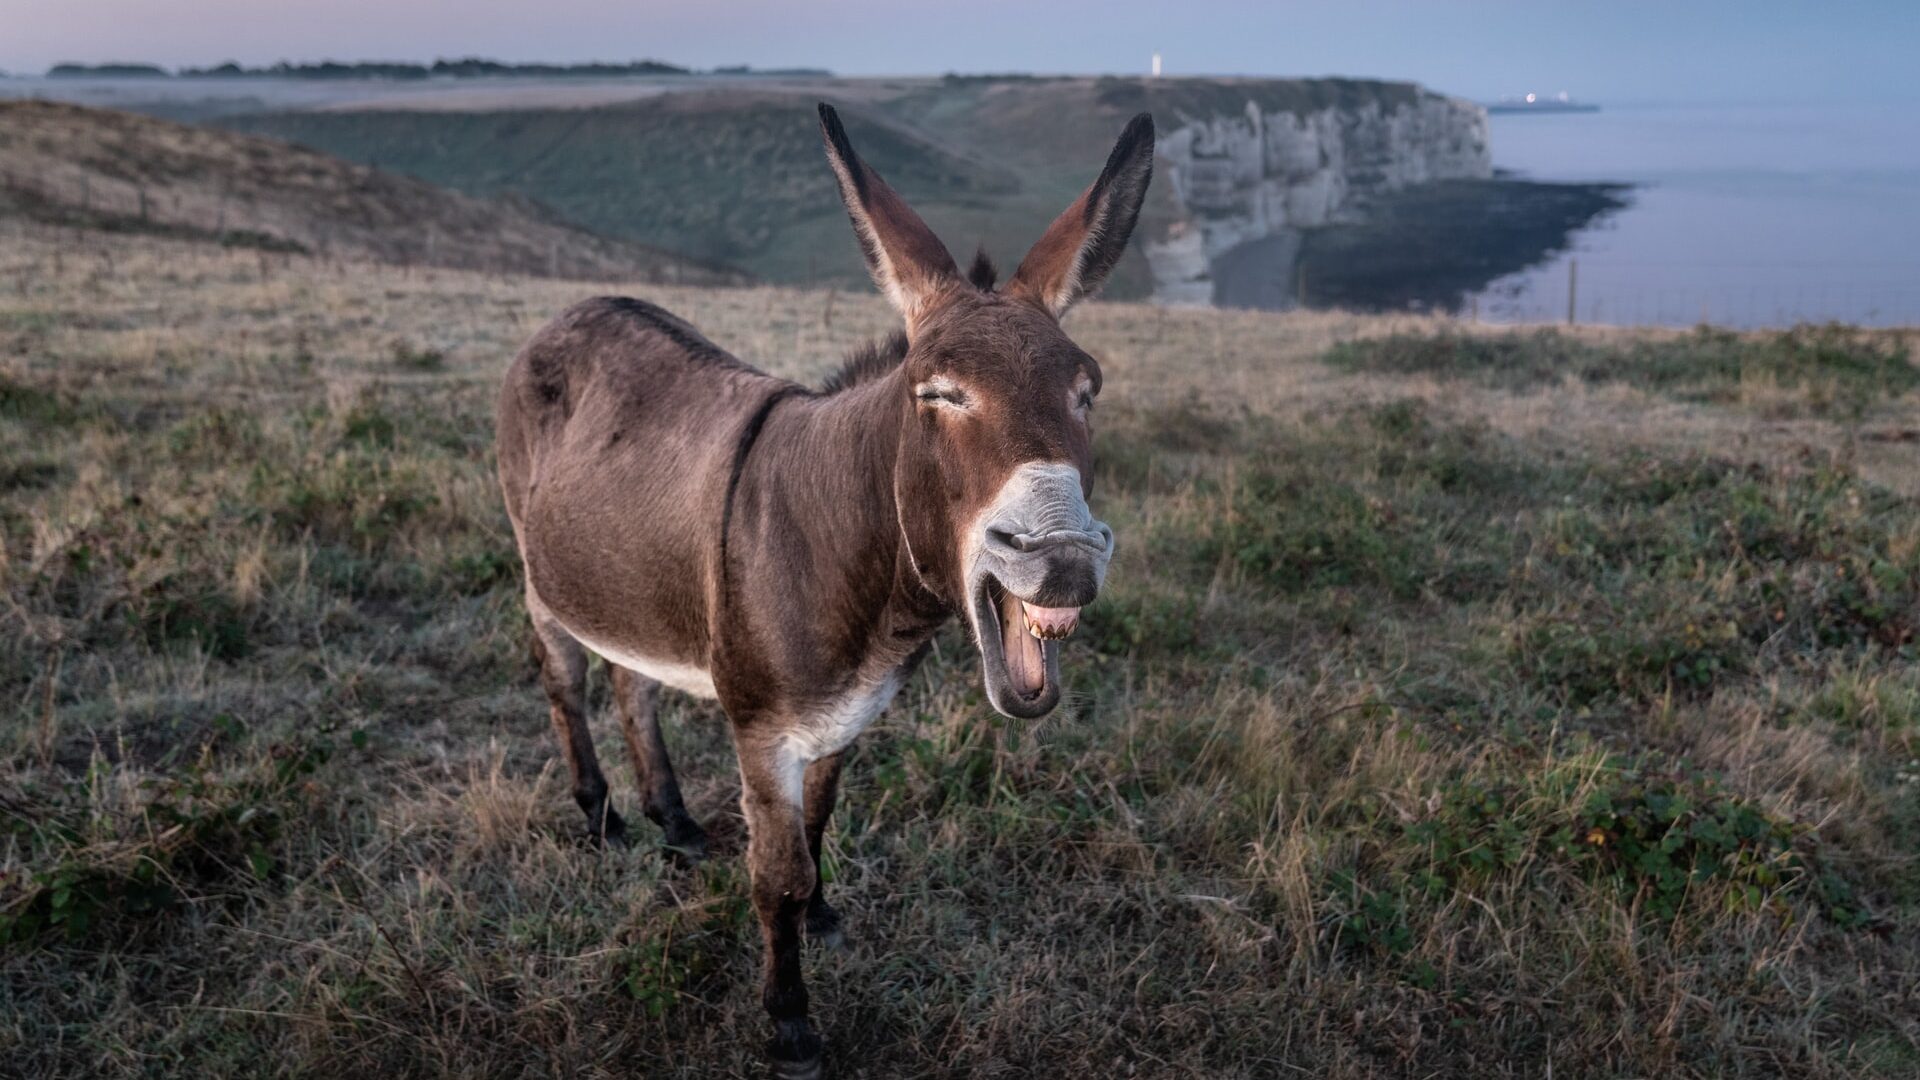 A laughing donkey stands on a patch of grass. In the background there is a cliffside and the ocean.